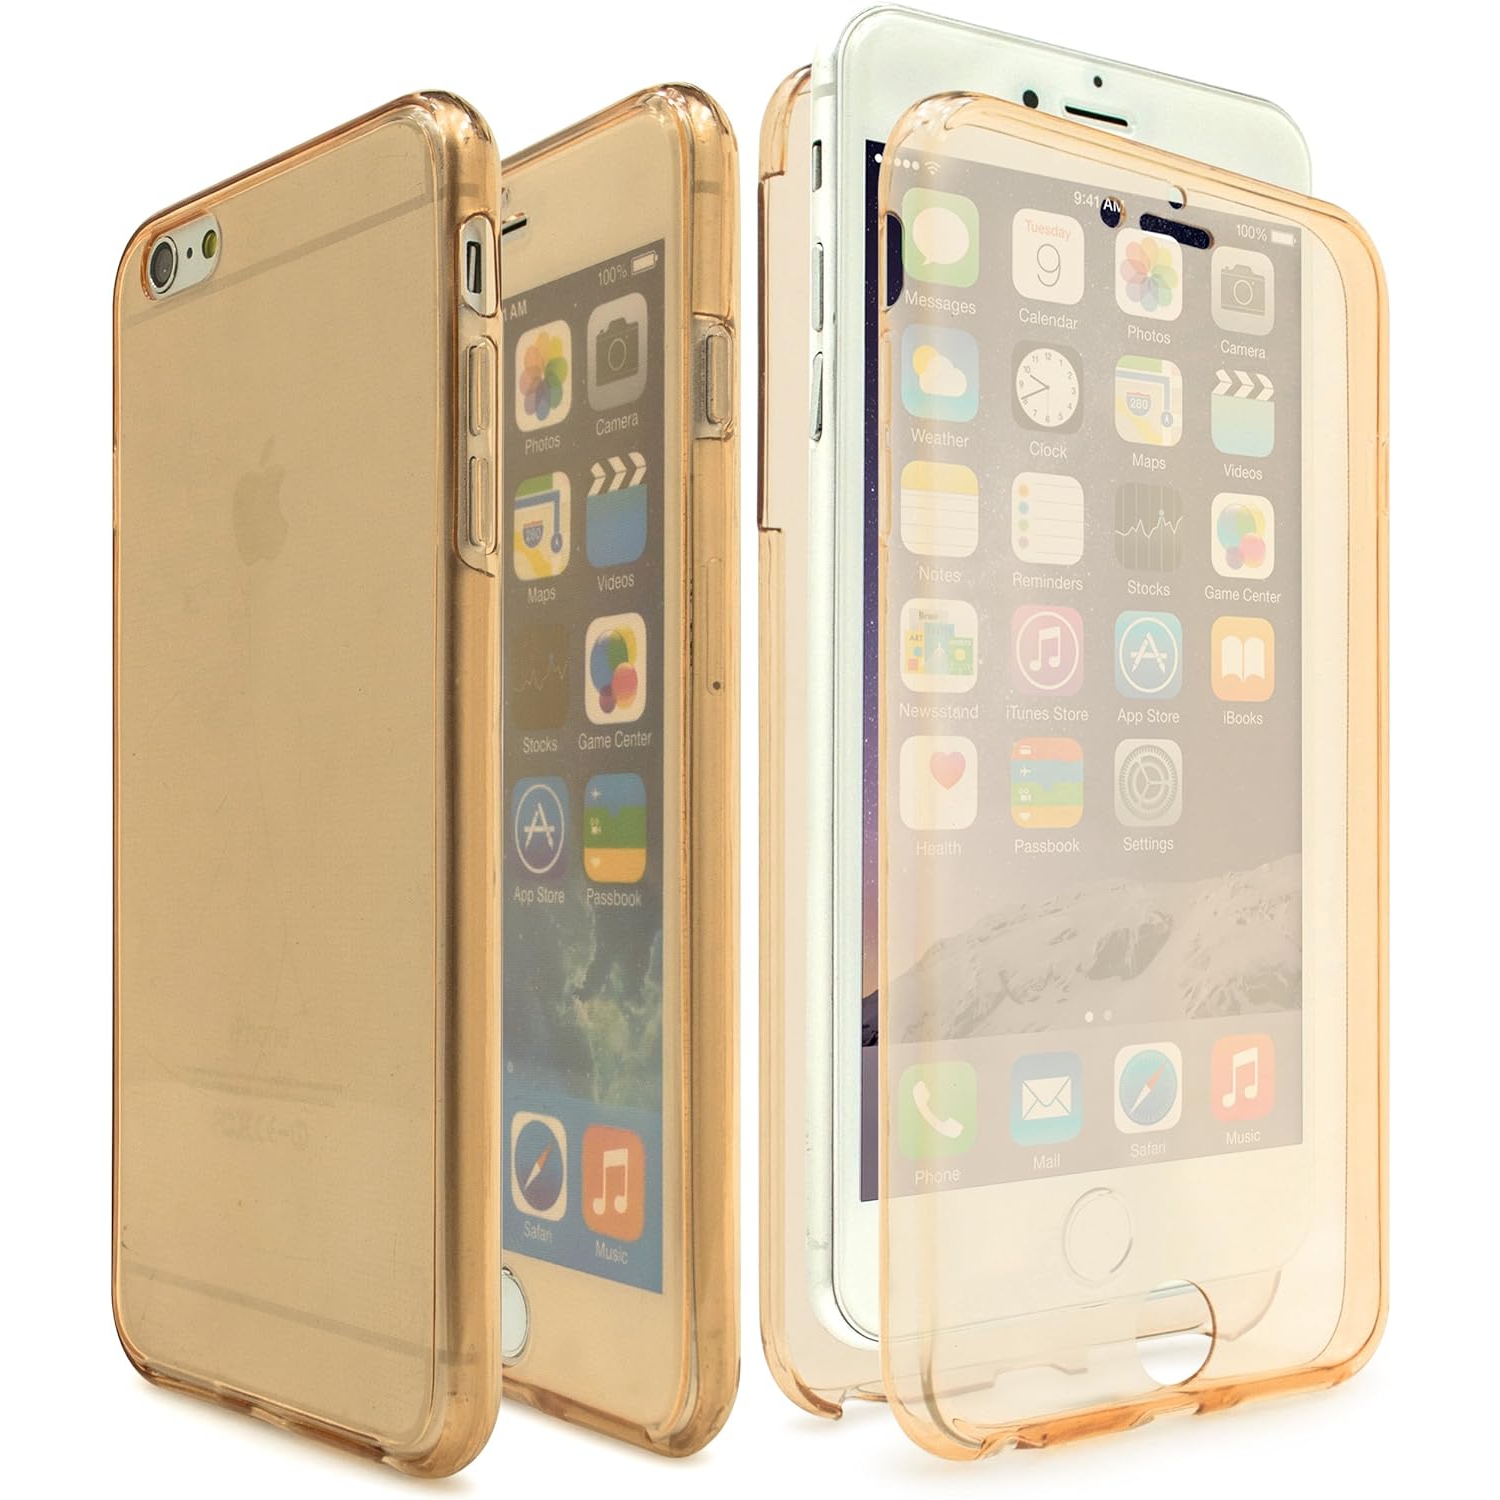 iPhone 6 Plus / 6s Plus Case, Slim Fit Front and Back Full Body Protective Crystal Two Pieces TPU Clear Cover